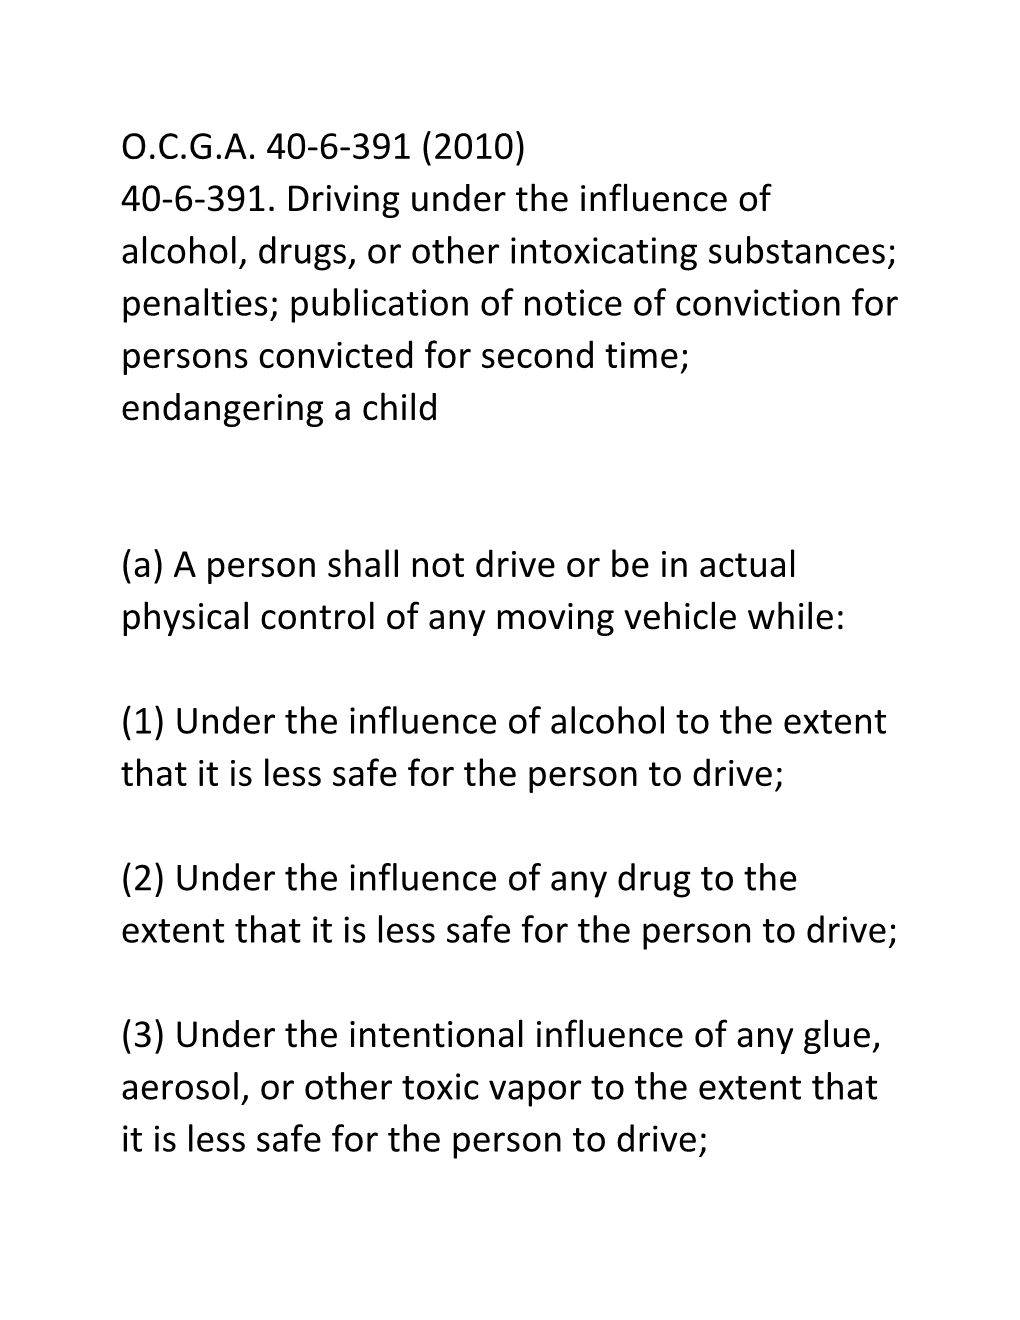 O.C.G.A. 40-6-391 (2010) 40-6-391. Driving Under the Influence of Alcohol, Drugs, Or Other